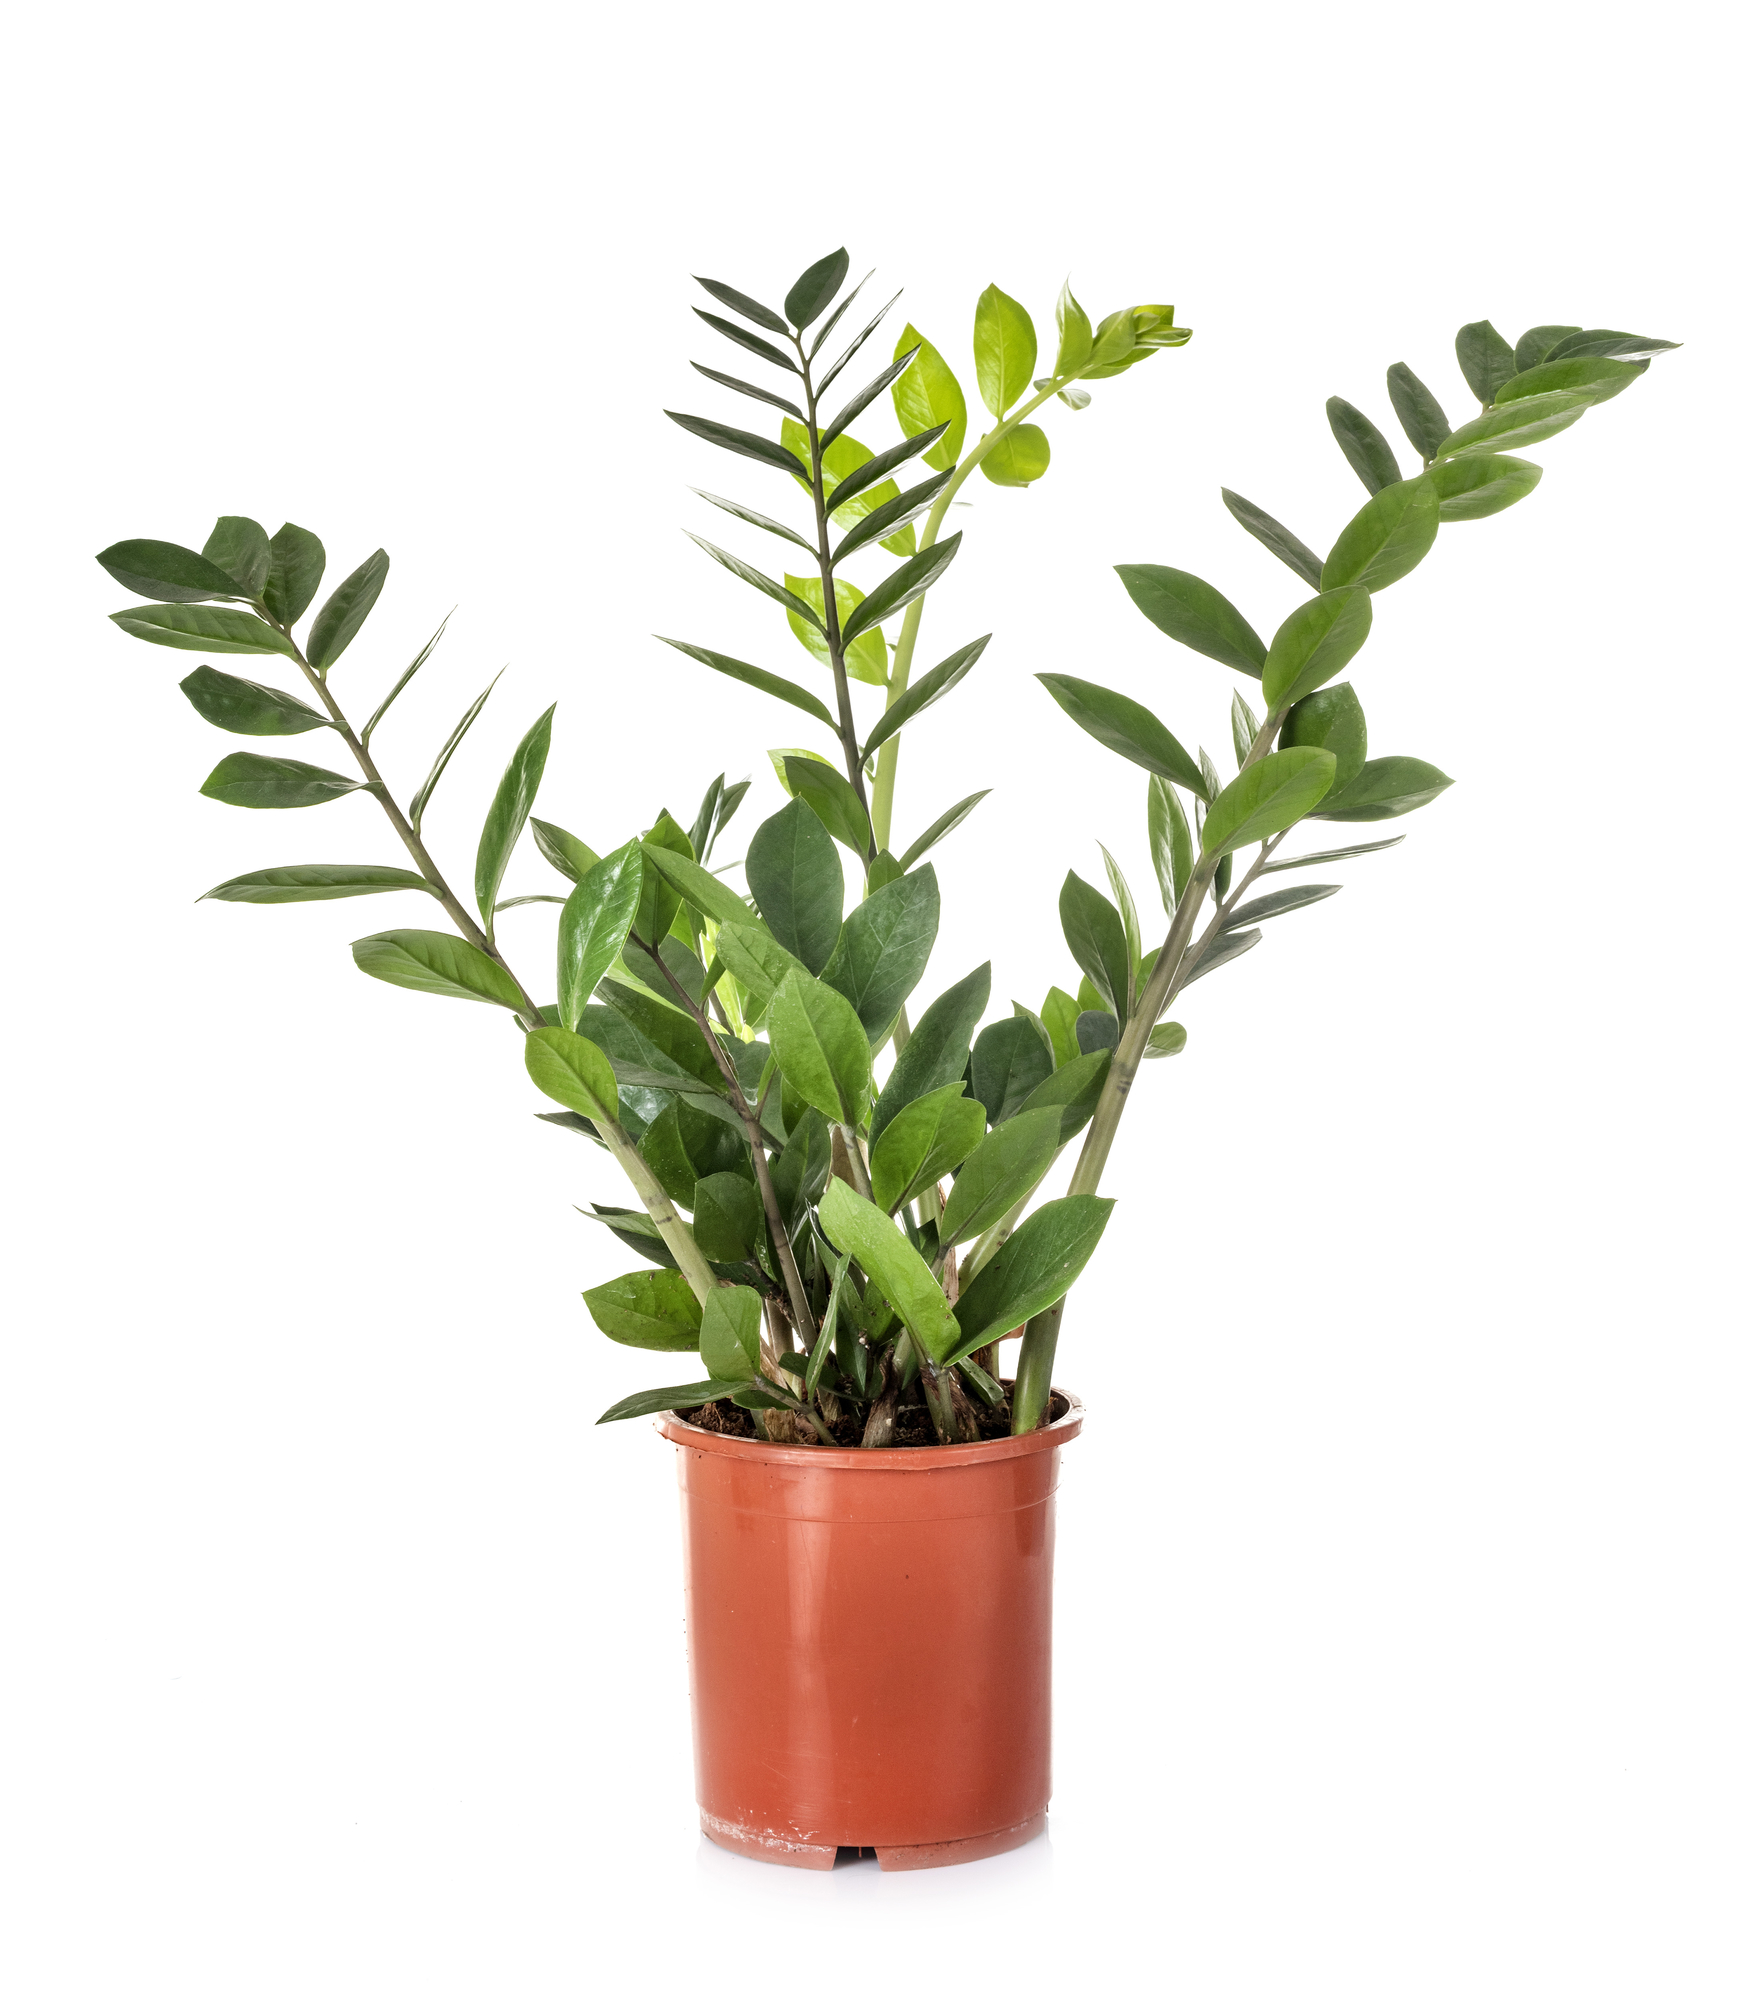 Picking the Perfect Plant for Your Dorm Room